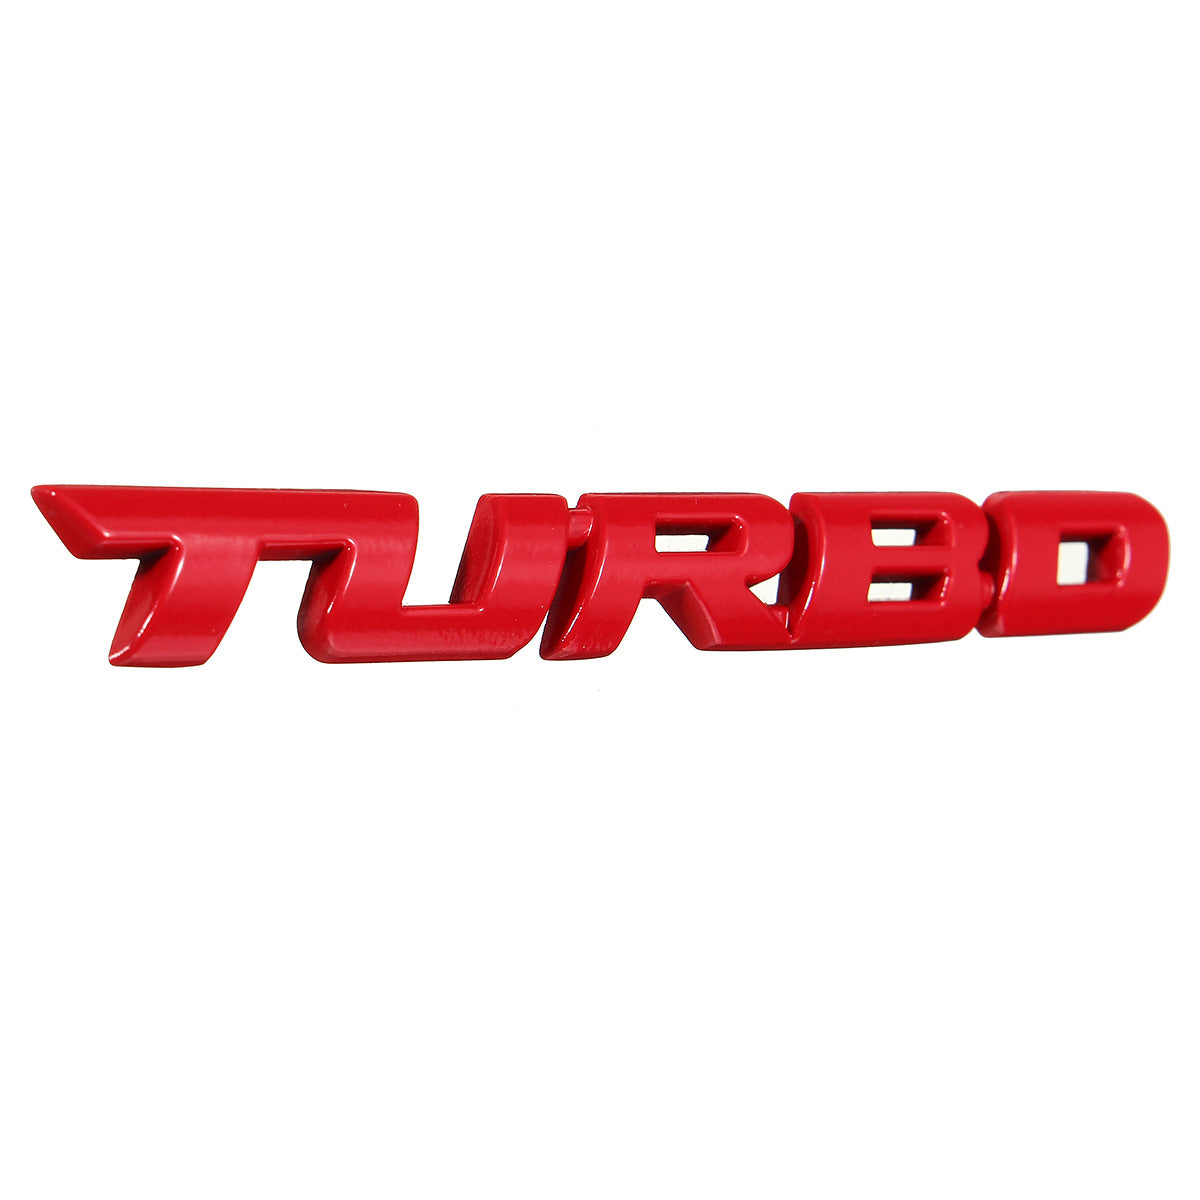 Firebrick Turbo 3D Metal Car Decals Lettering Badge Sticker for Auto Body Rear Tailgate